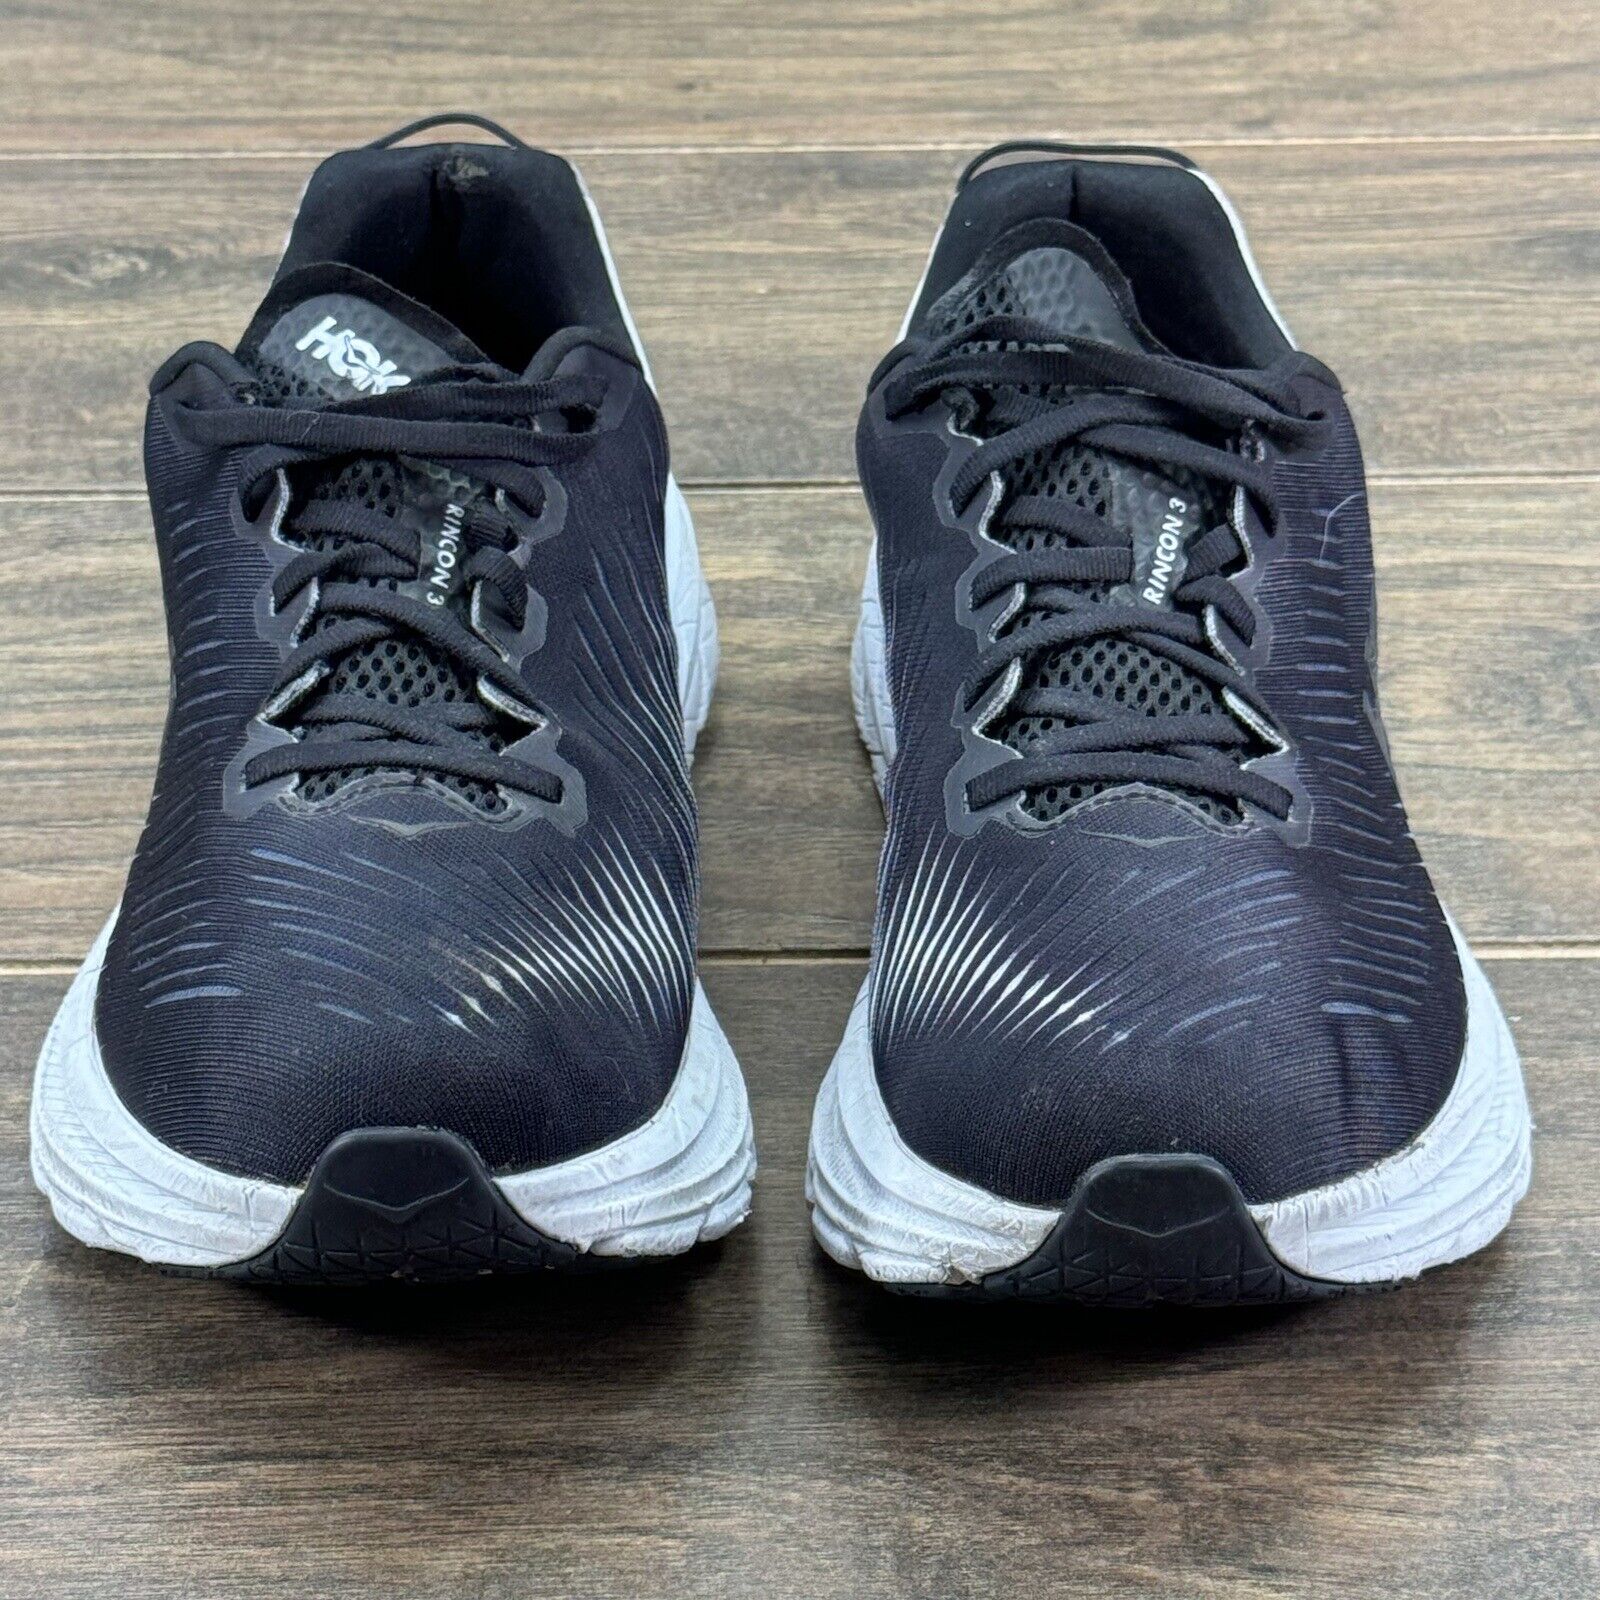 Hoka One One Rincon 3 Running Shoes Mens 11.5 2E Black Athletic Workout